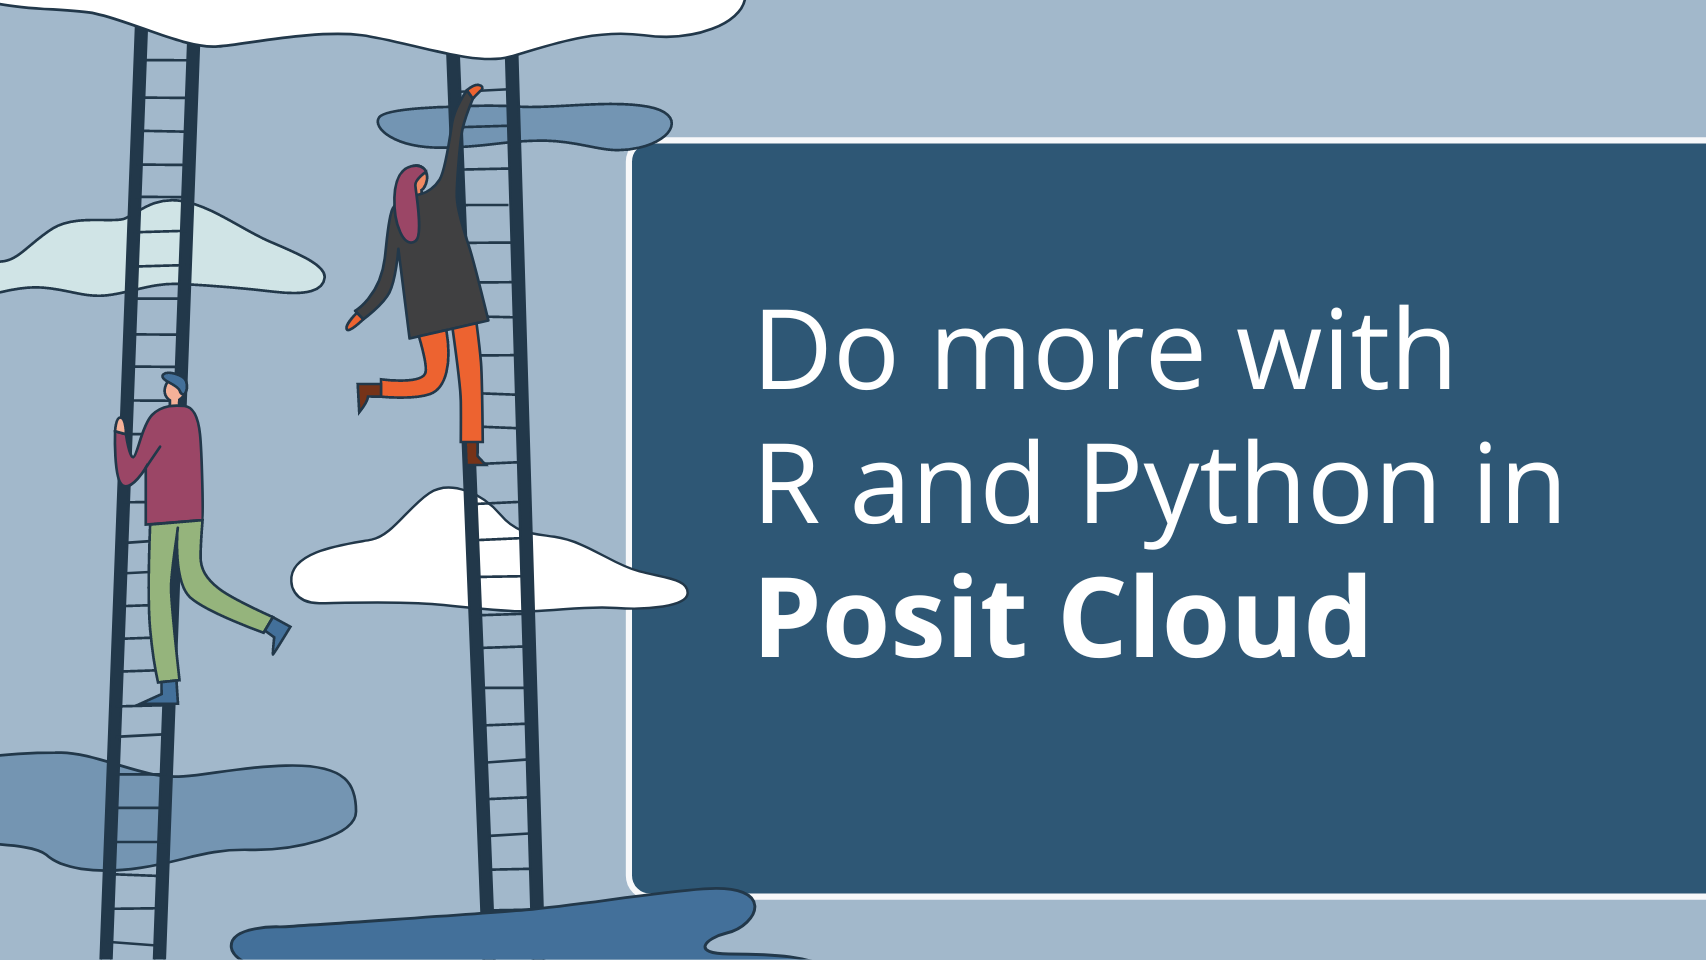 Text: "Do more with R and Python in Posit Cloud." A cartoon of two people climbing ladders into the clouds.